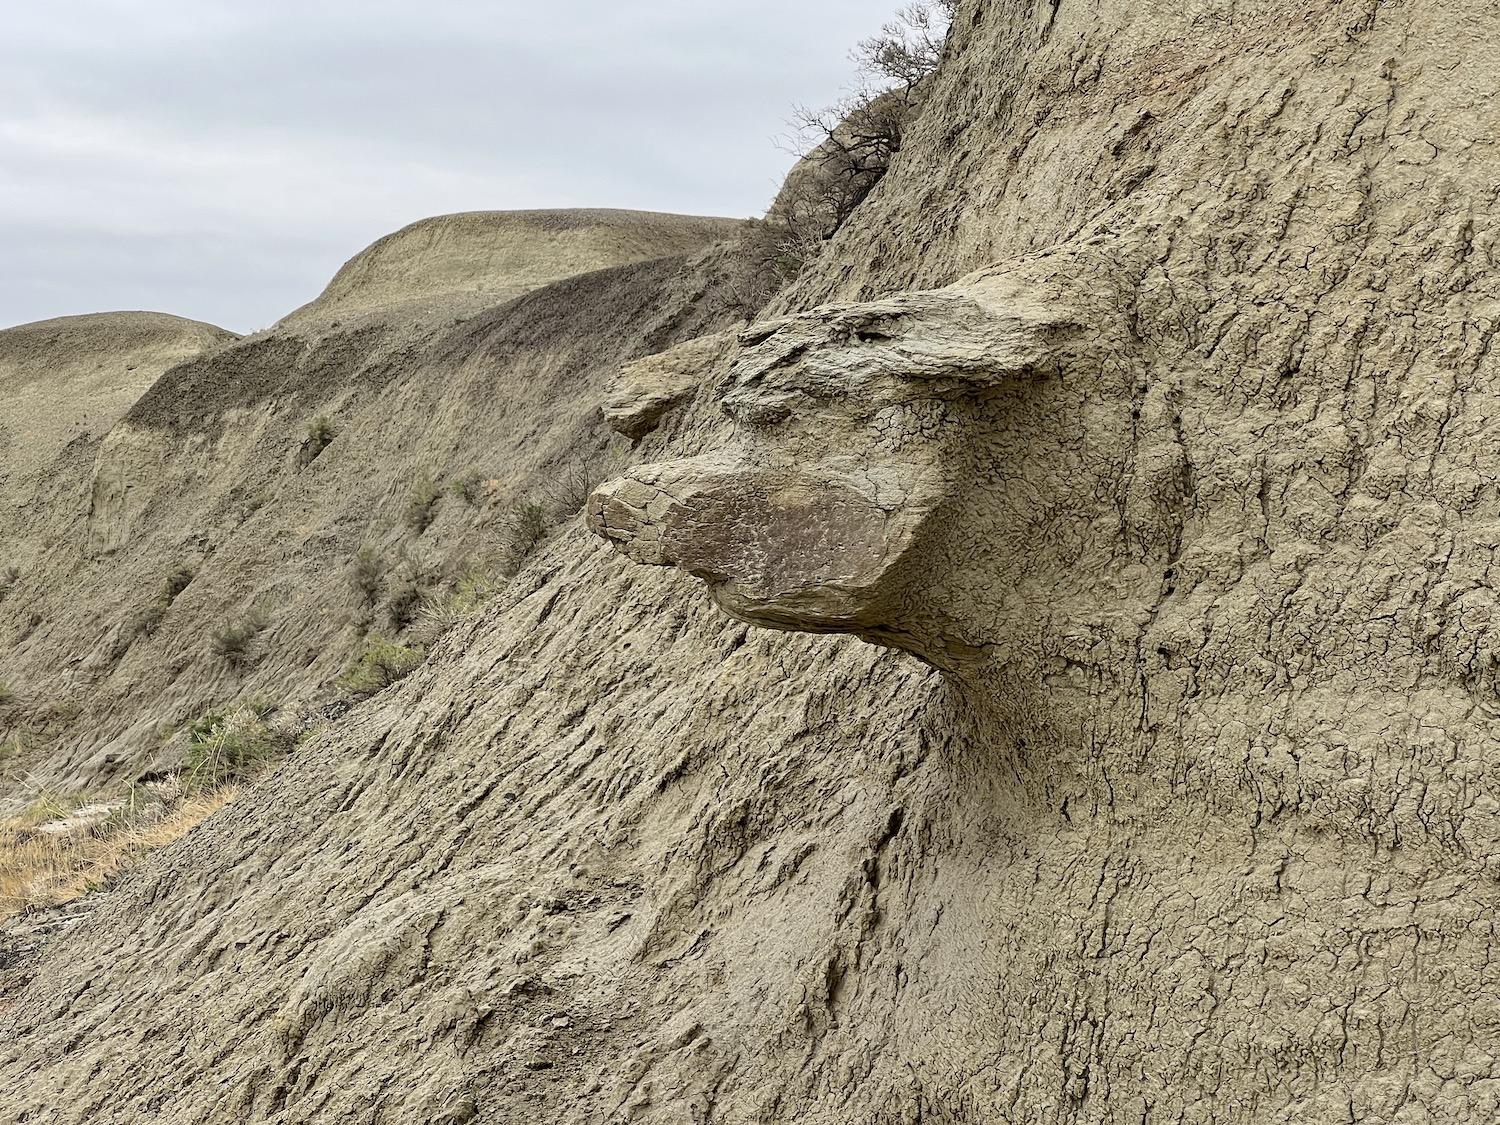 It looks like an animal, but it's just a natural formation.